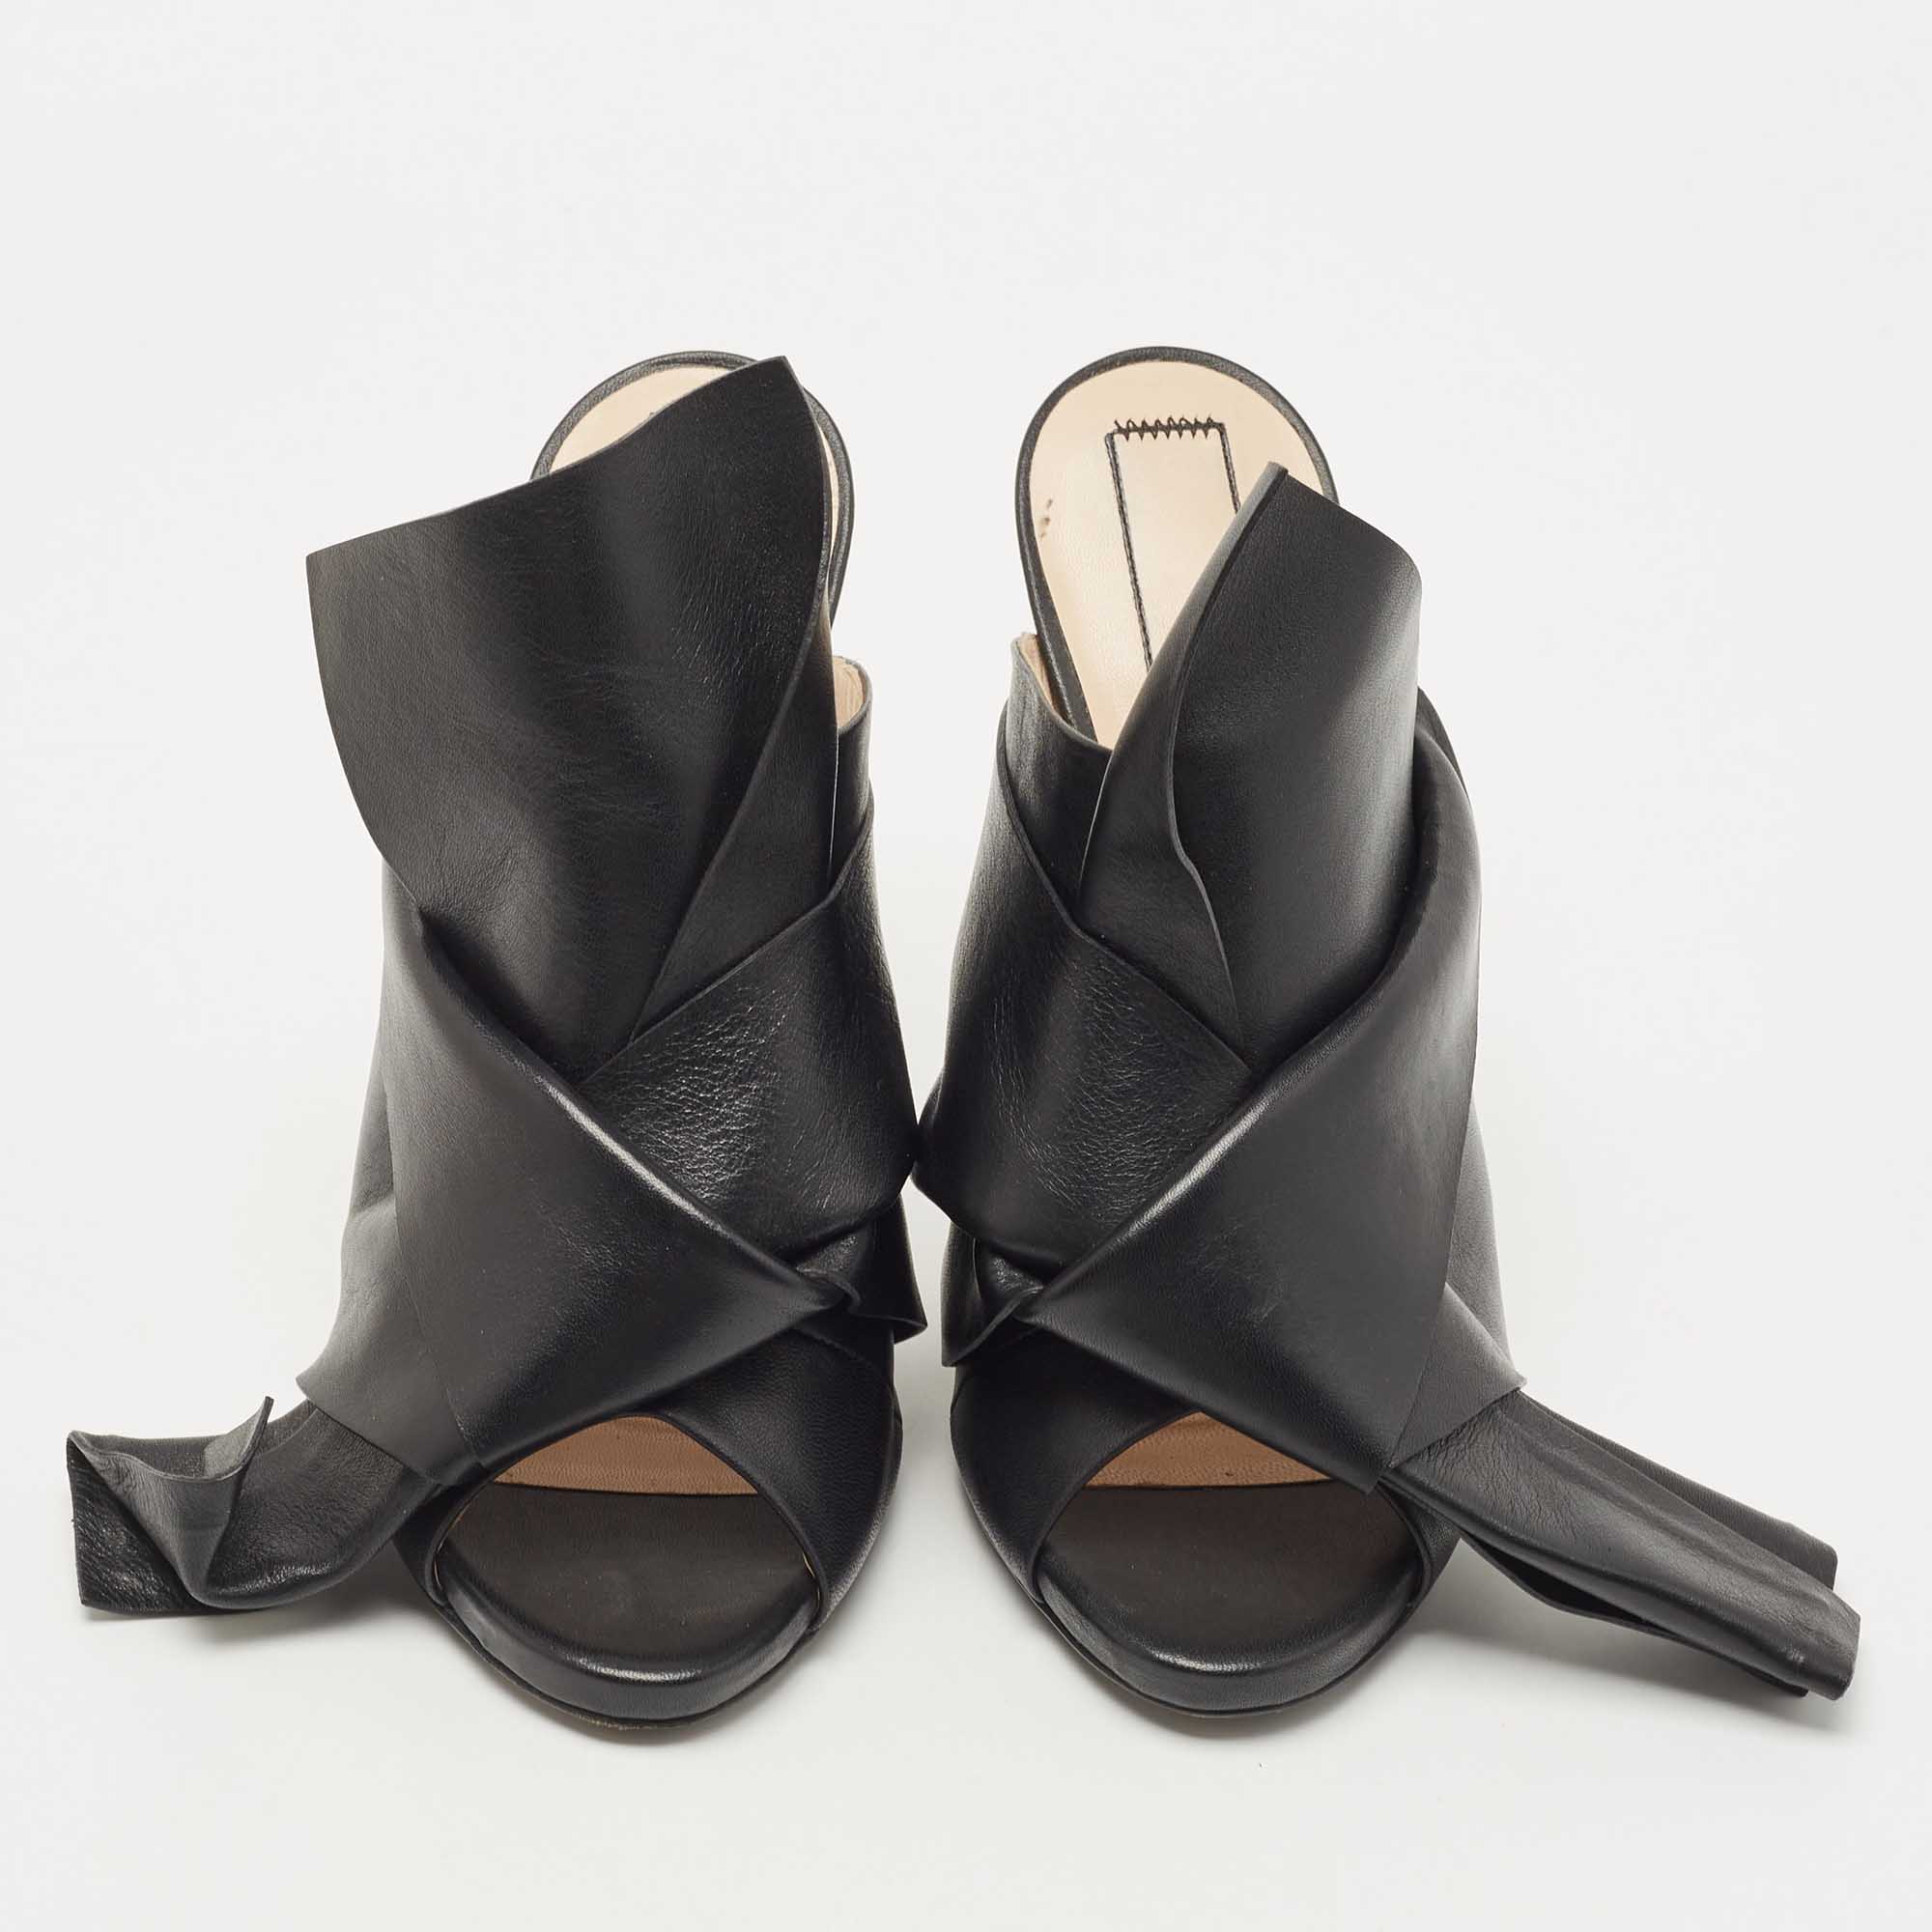 N21 Black Leather Raso Knot Mules Size 38